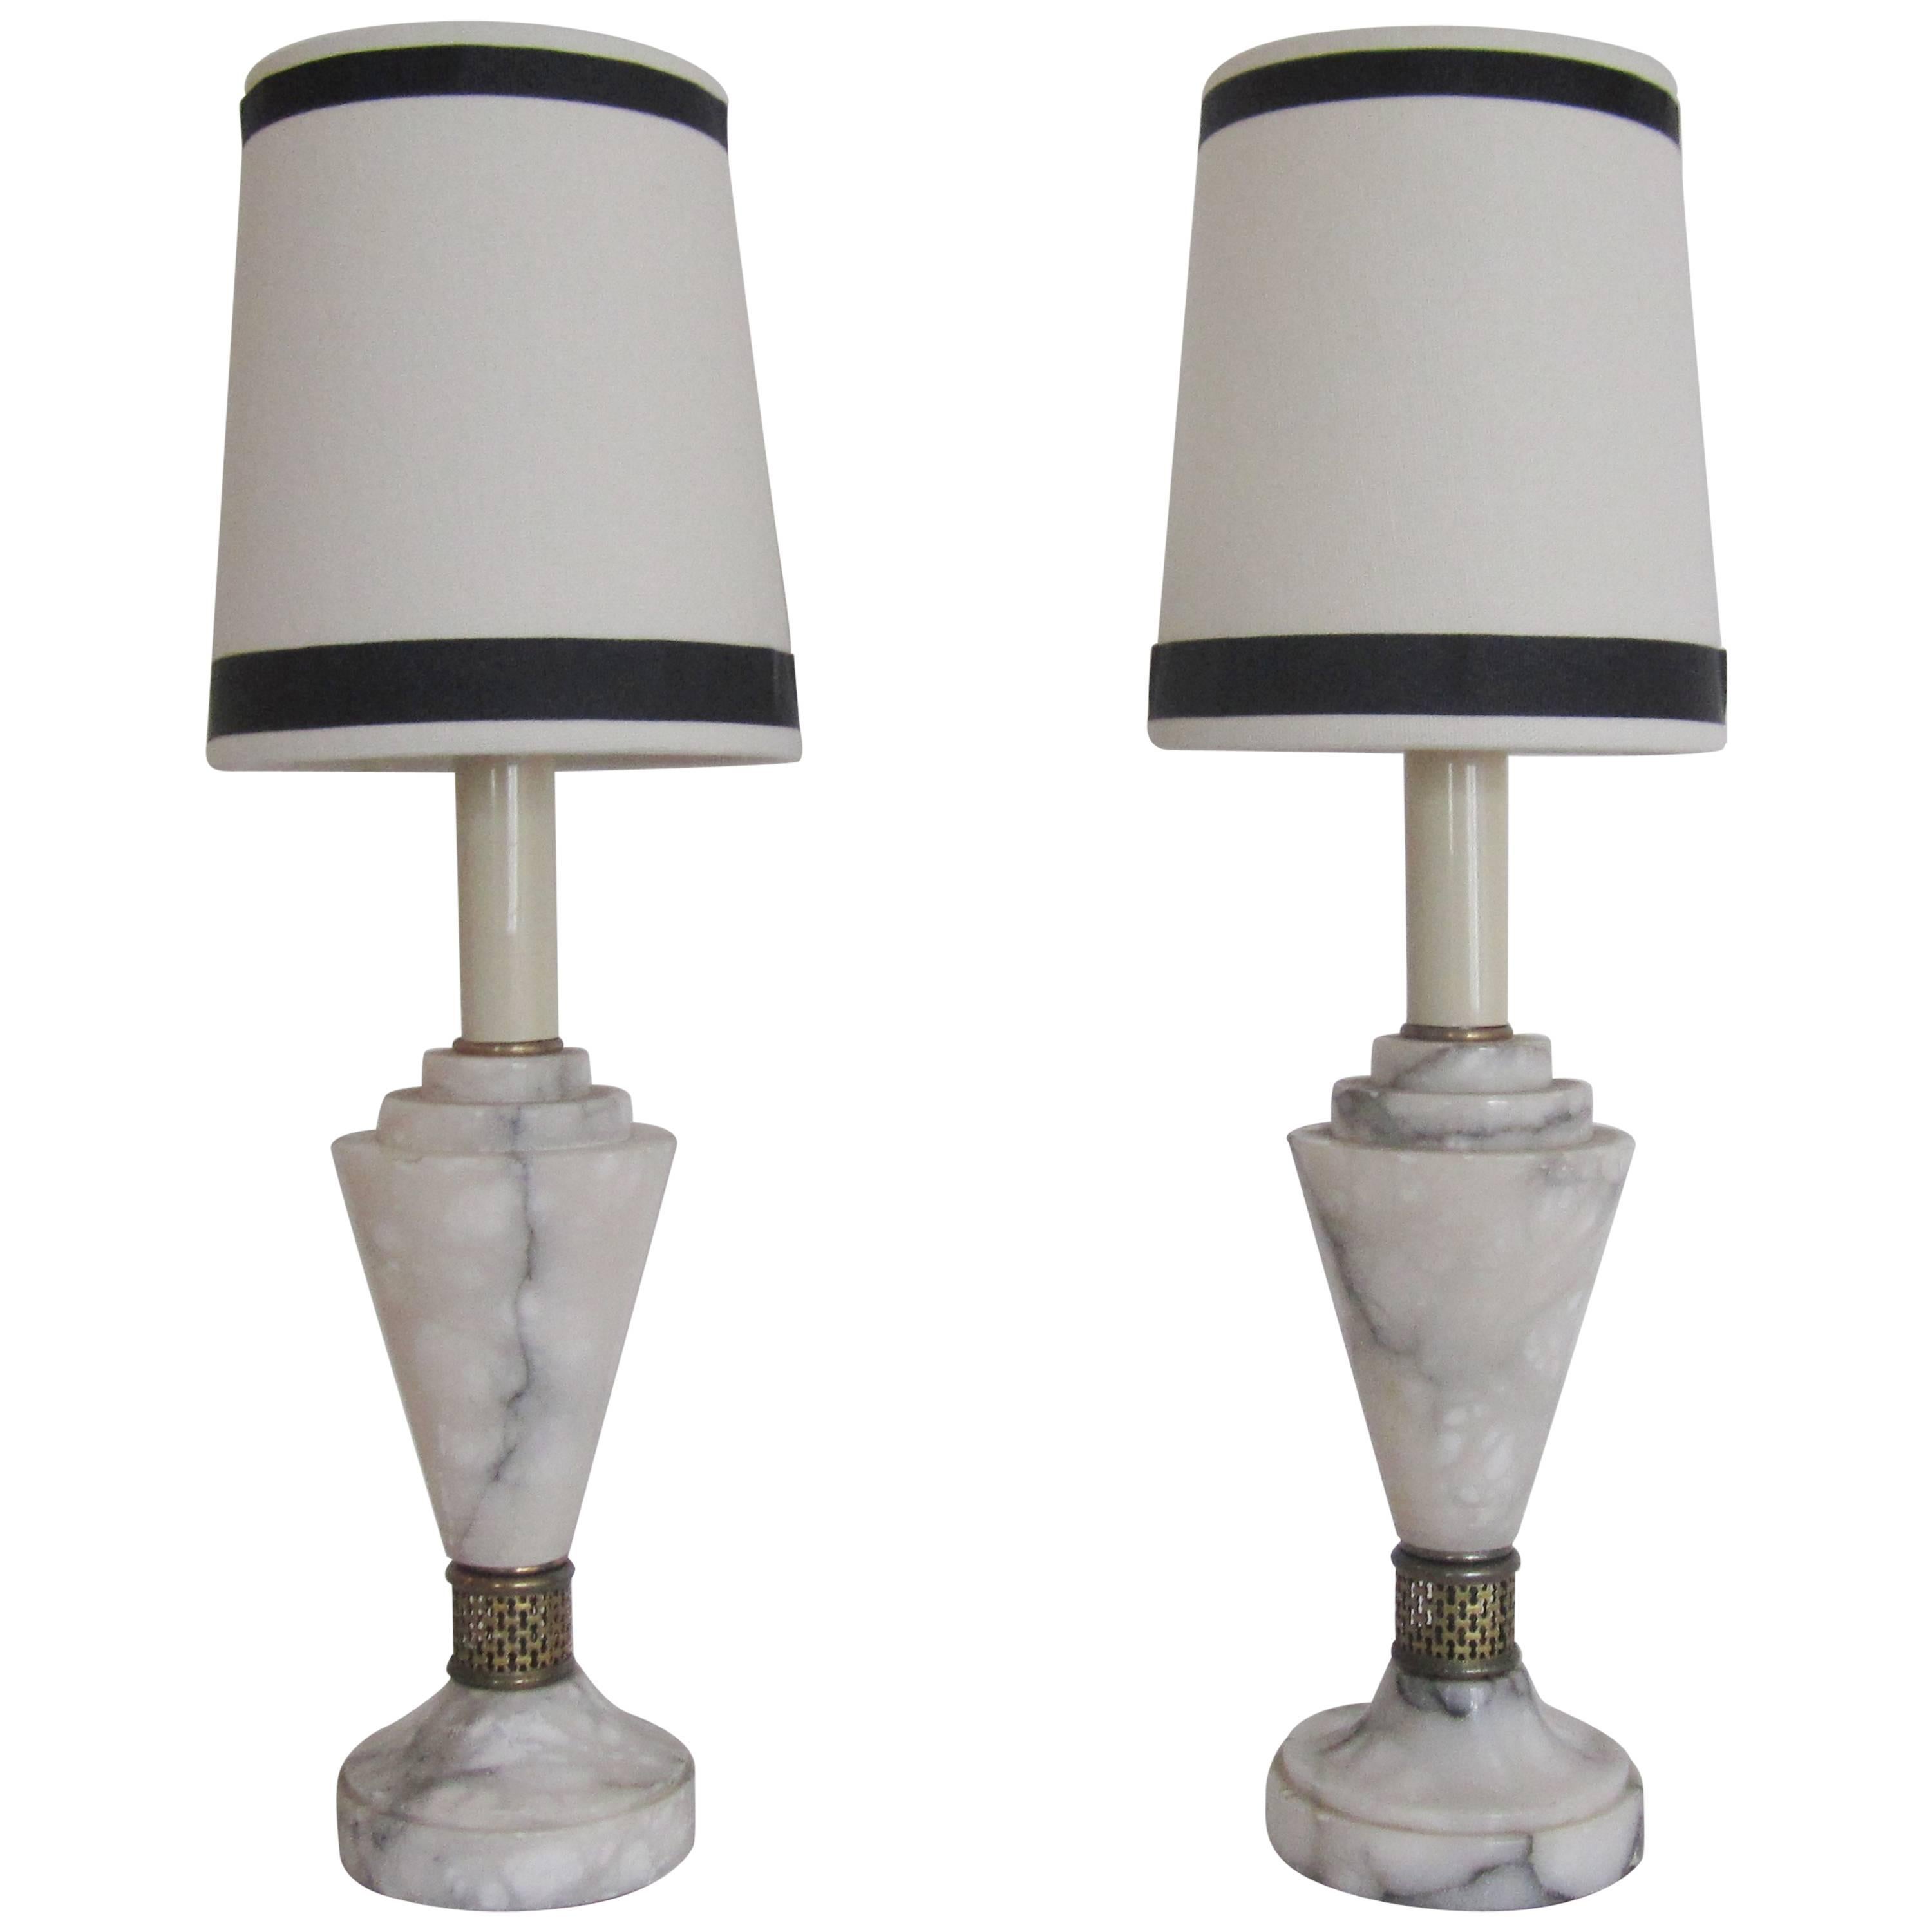 Art Deco Modern Marble Table Lamps, Pair